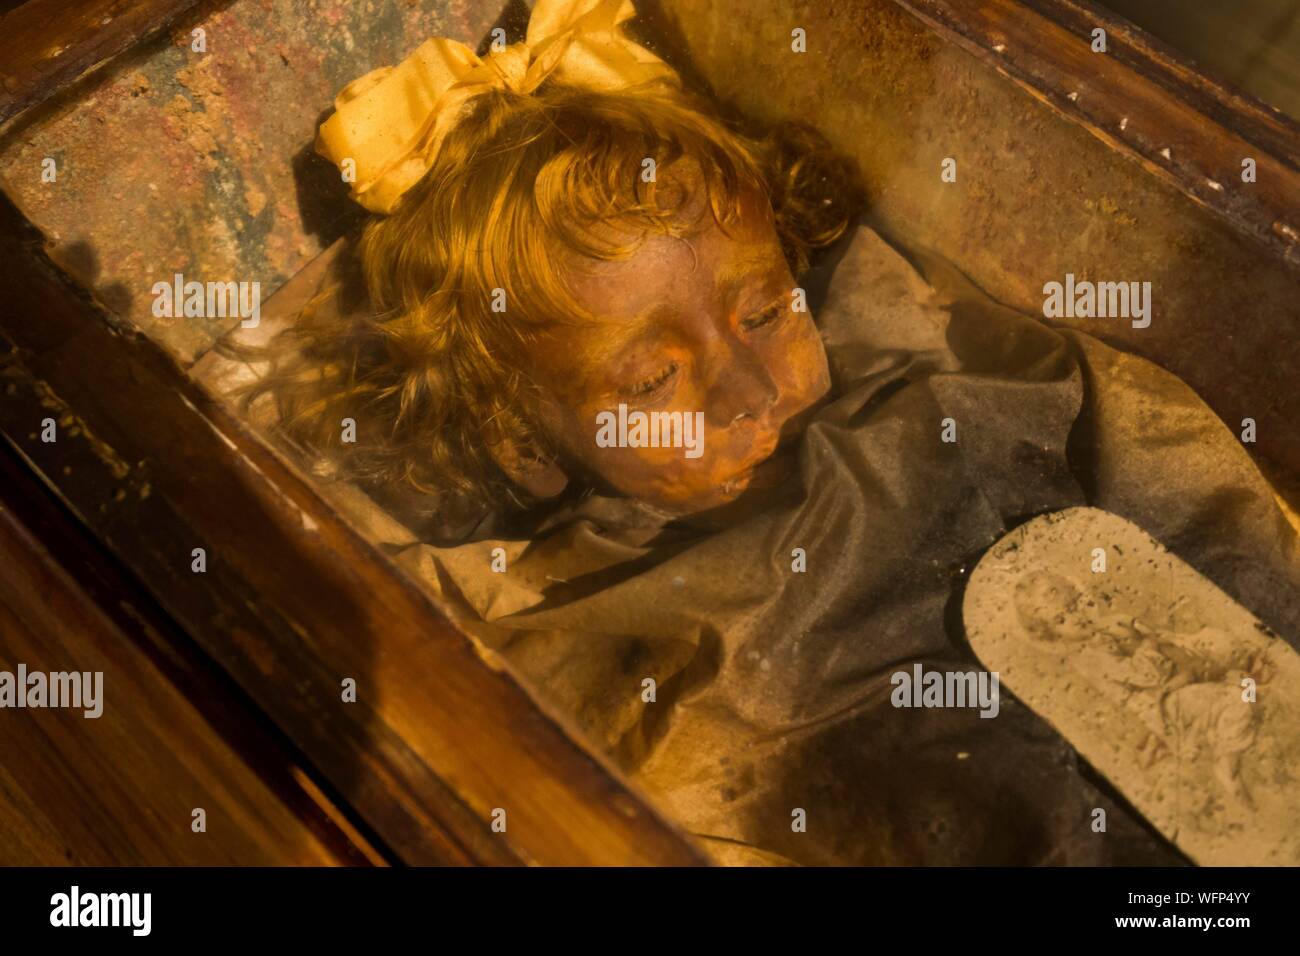 Italy, Sicily, Palermo, catacombs of the Capuchin convent, mumies, Rosalia Lombardo, deceased at age 2 from pneumonia in 1920, and embalmed Stock Photo